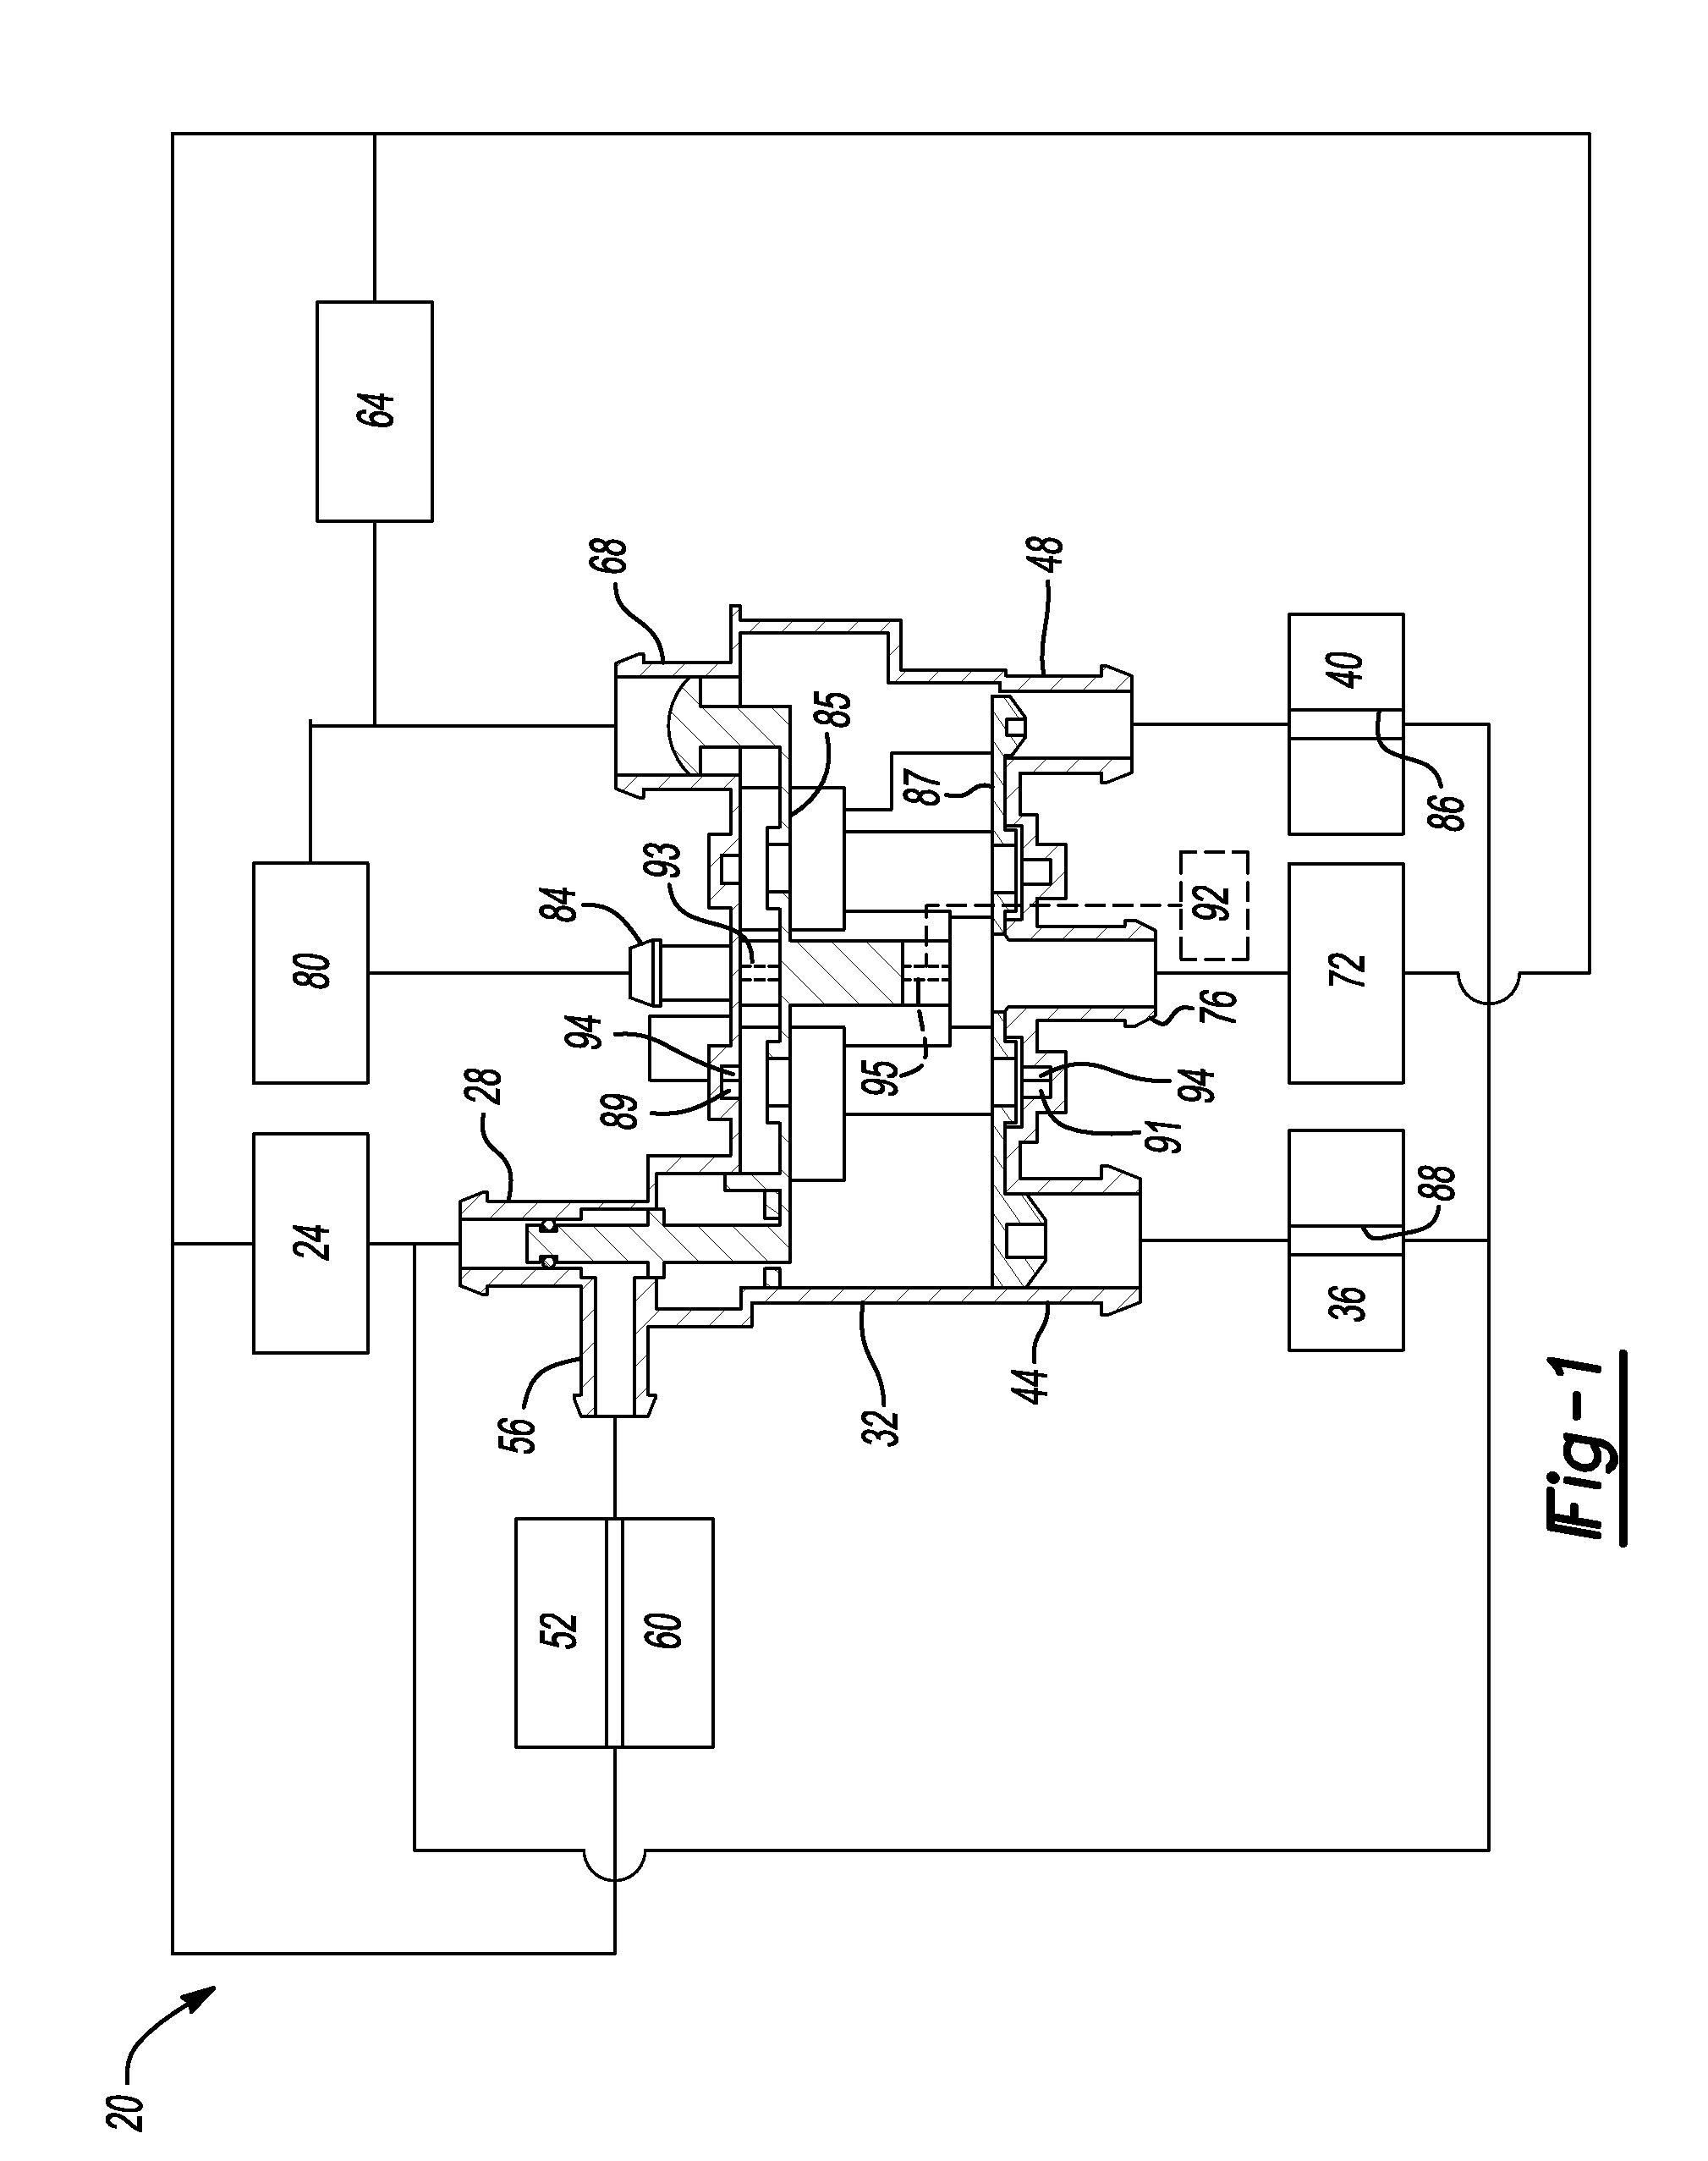 Vehicle cooling system with directed flows